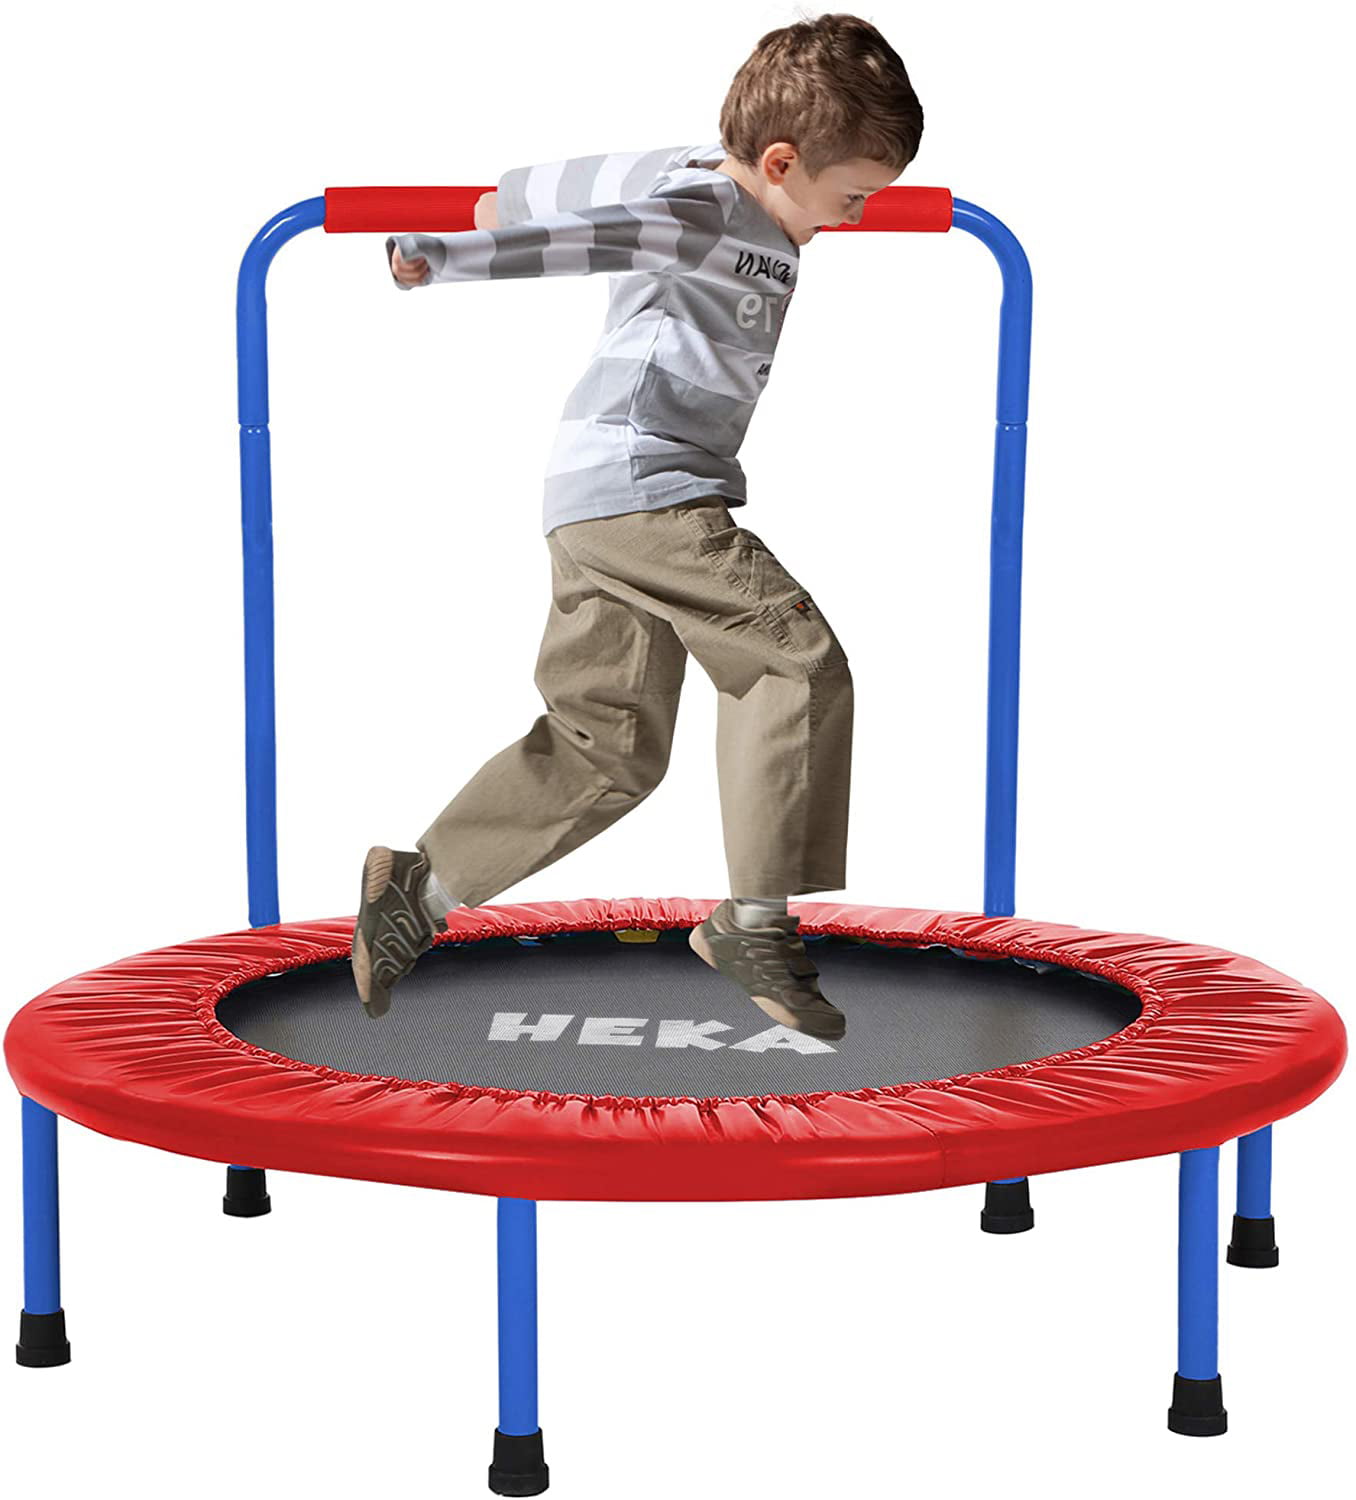 LBLA 38 Mini Trampoline for Kids 3-10 Adjustable Handrail and Safety Padded Cover Foldable Bungee Rebounder Portable Kids Trampolines Exercise Indoor/Outdoor 